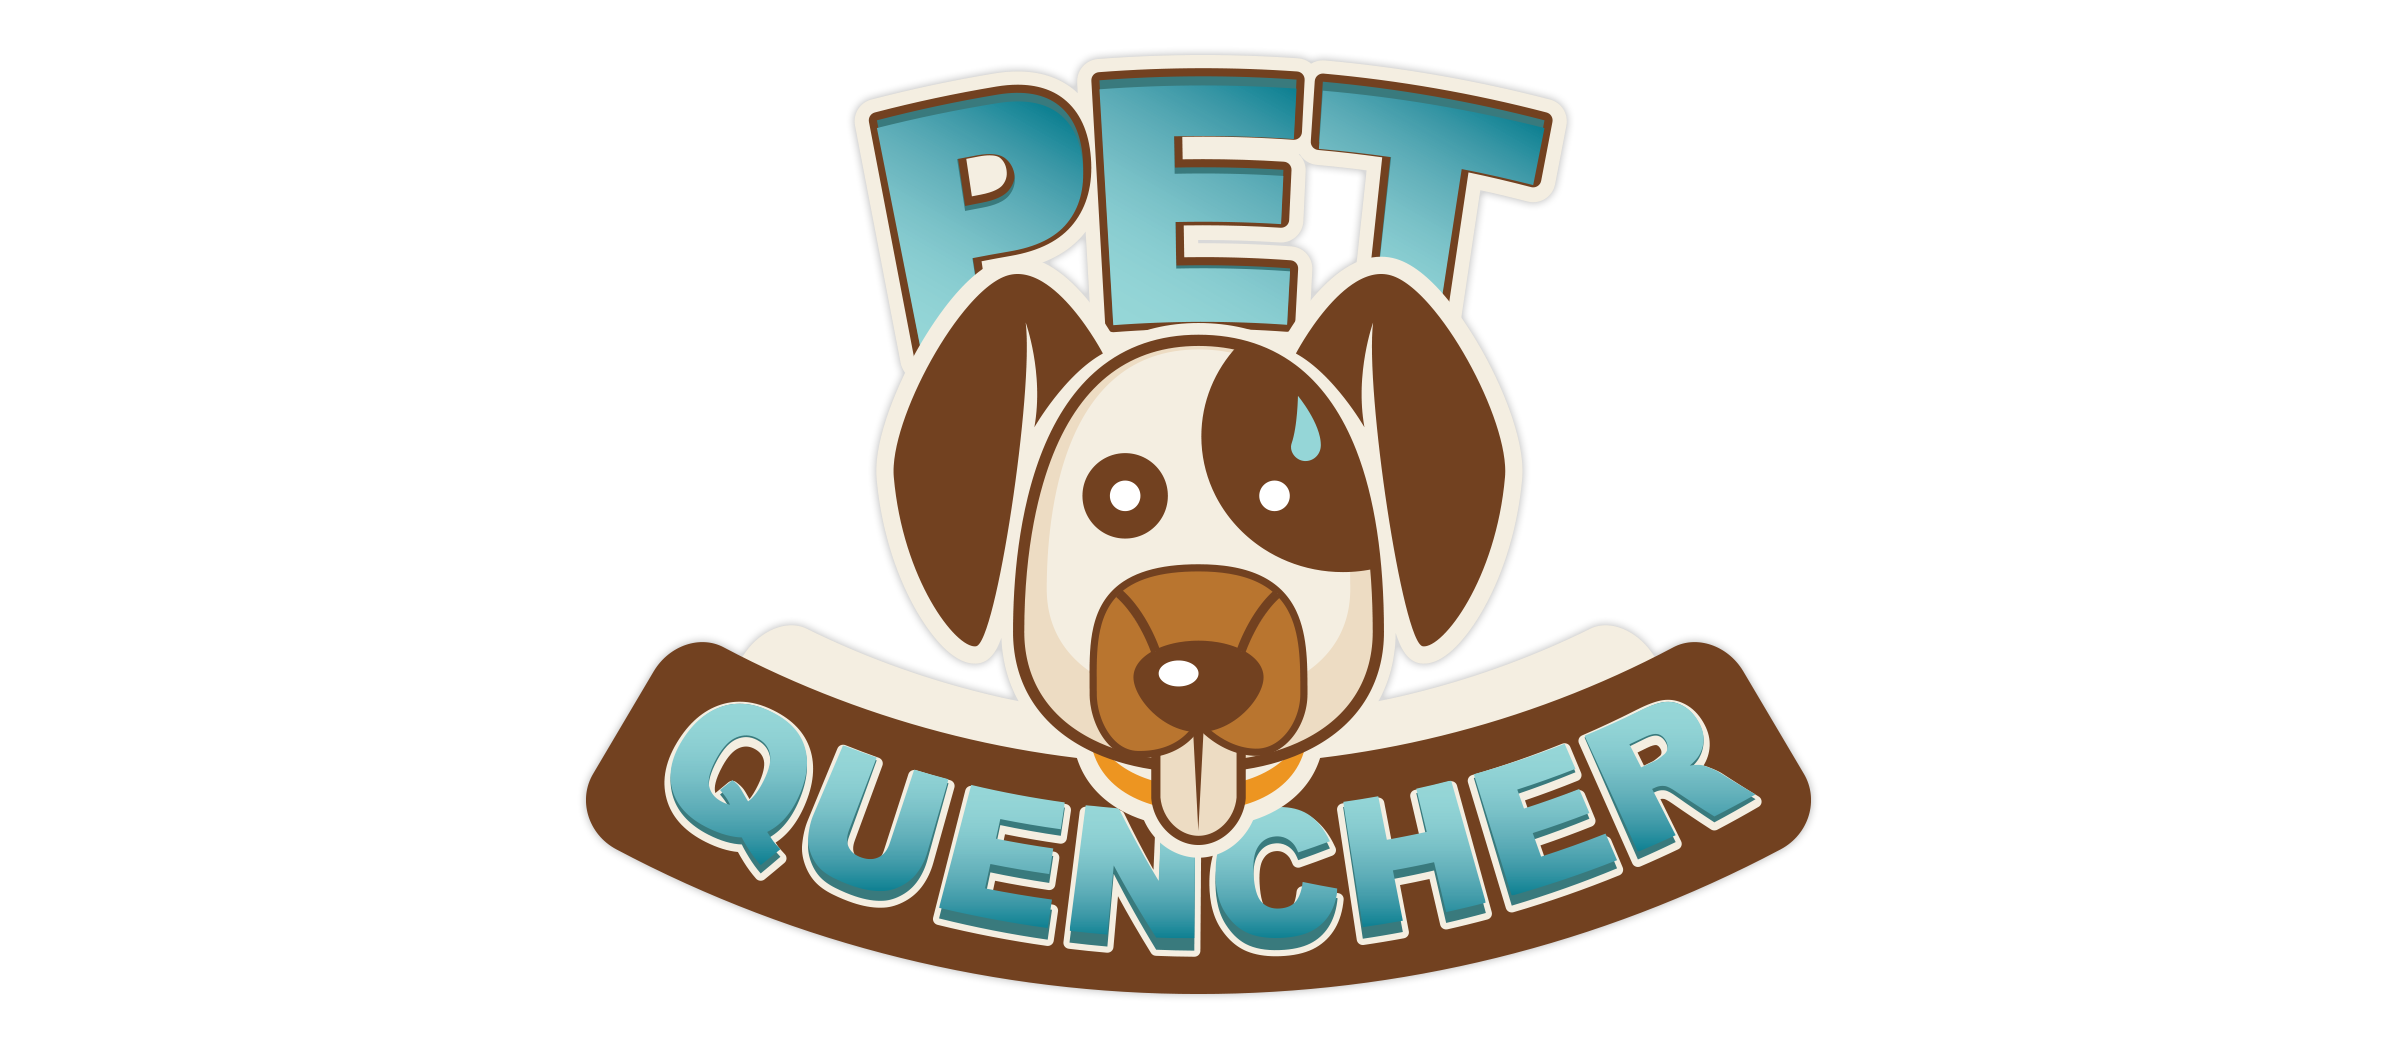 The Pet Quencher is a pet invention which every pet owner should have on hand at all times